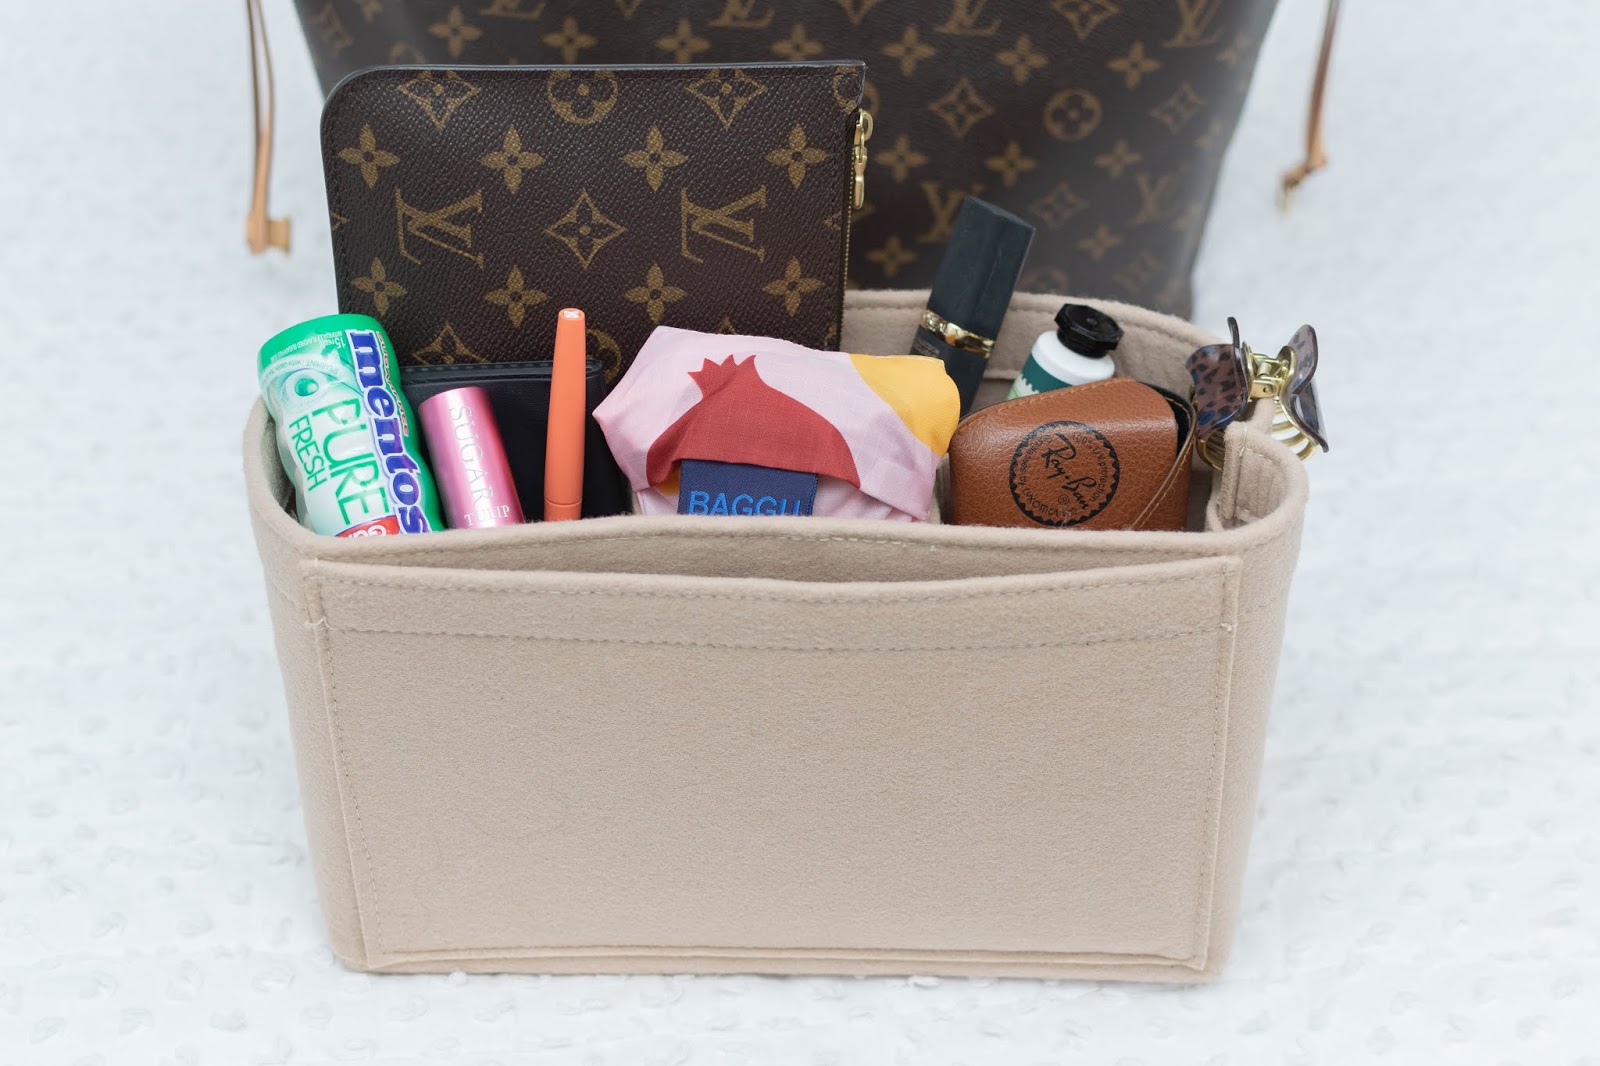 WHAT'S INSIDE MY BAG  LOUIS VUITTON NEVERFULL 